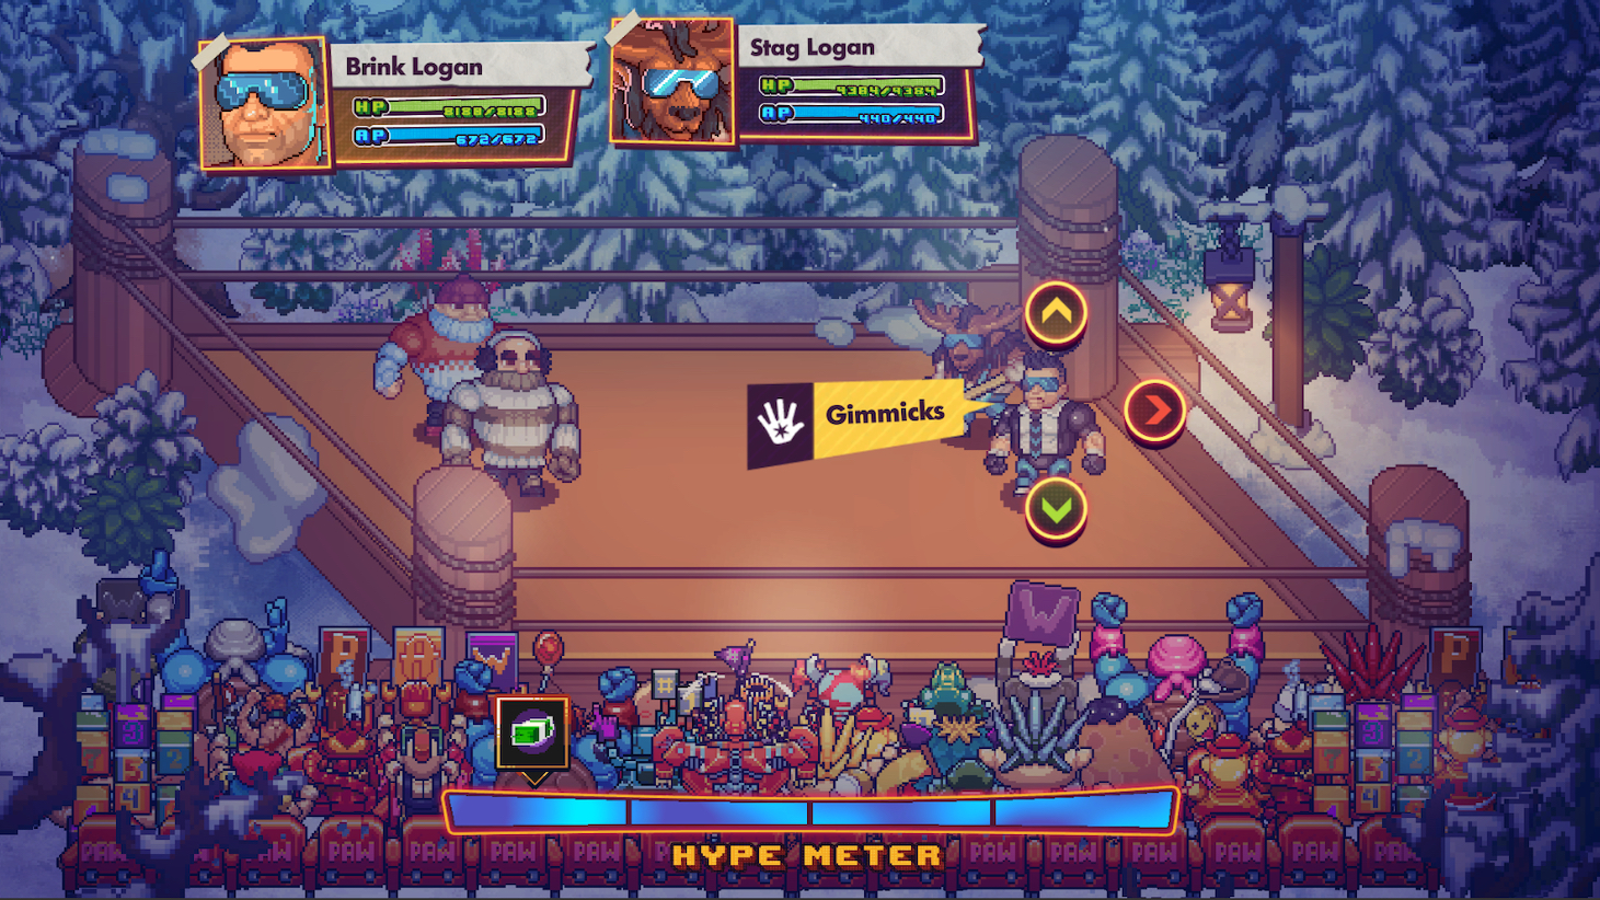 WrestleQuest Enters the Ring for Netflix Games and Brings an RPG